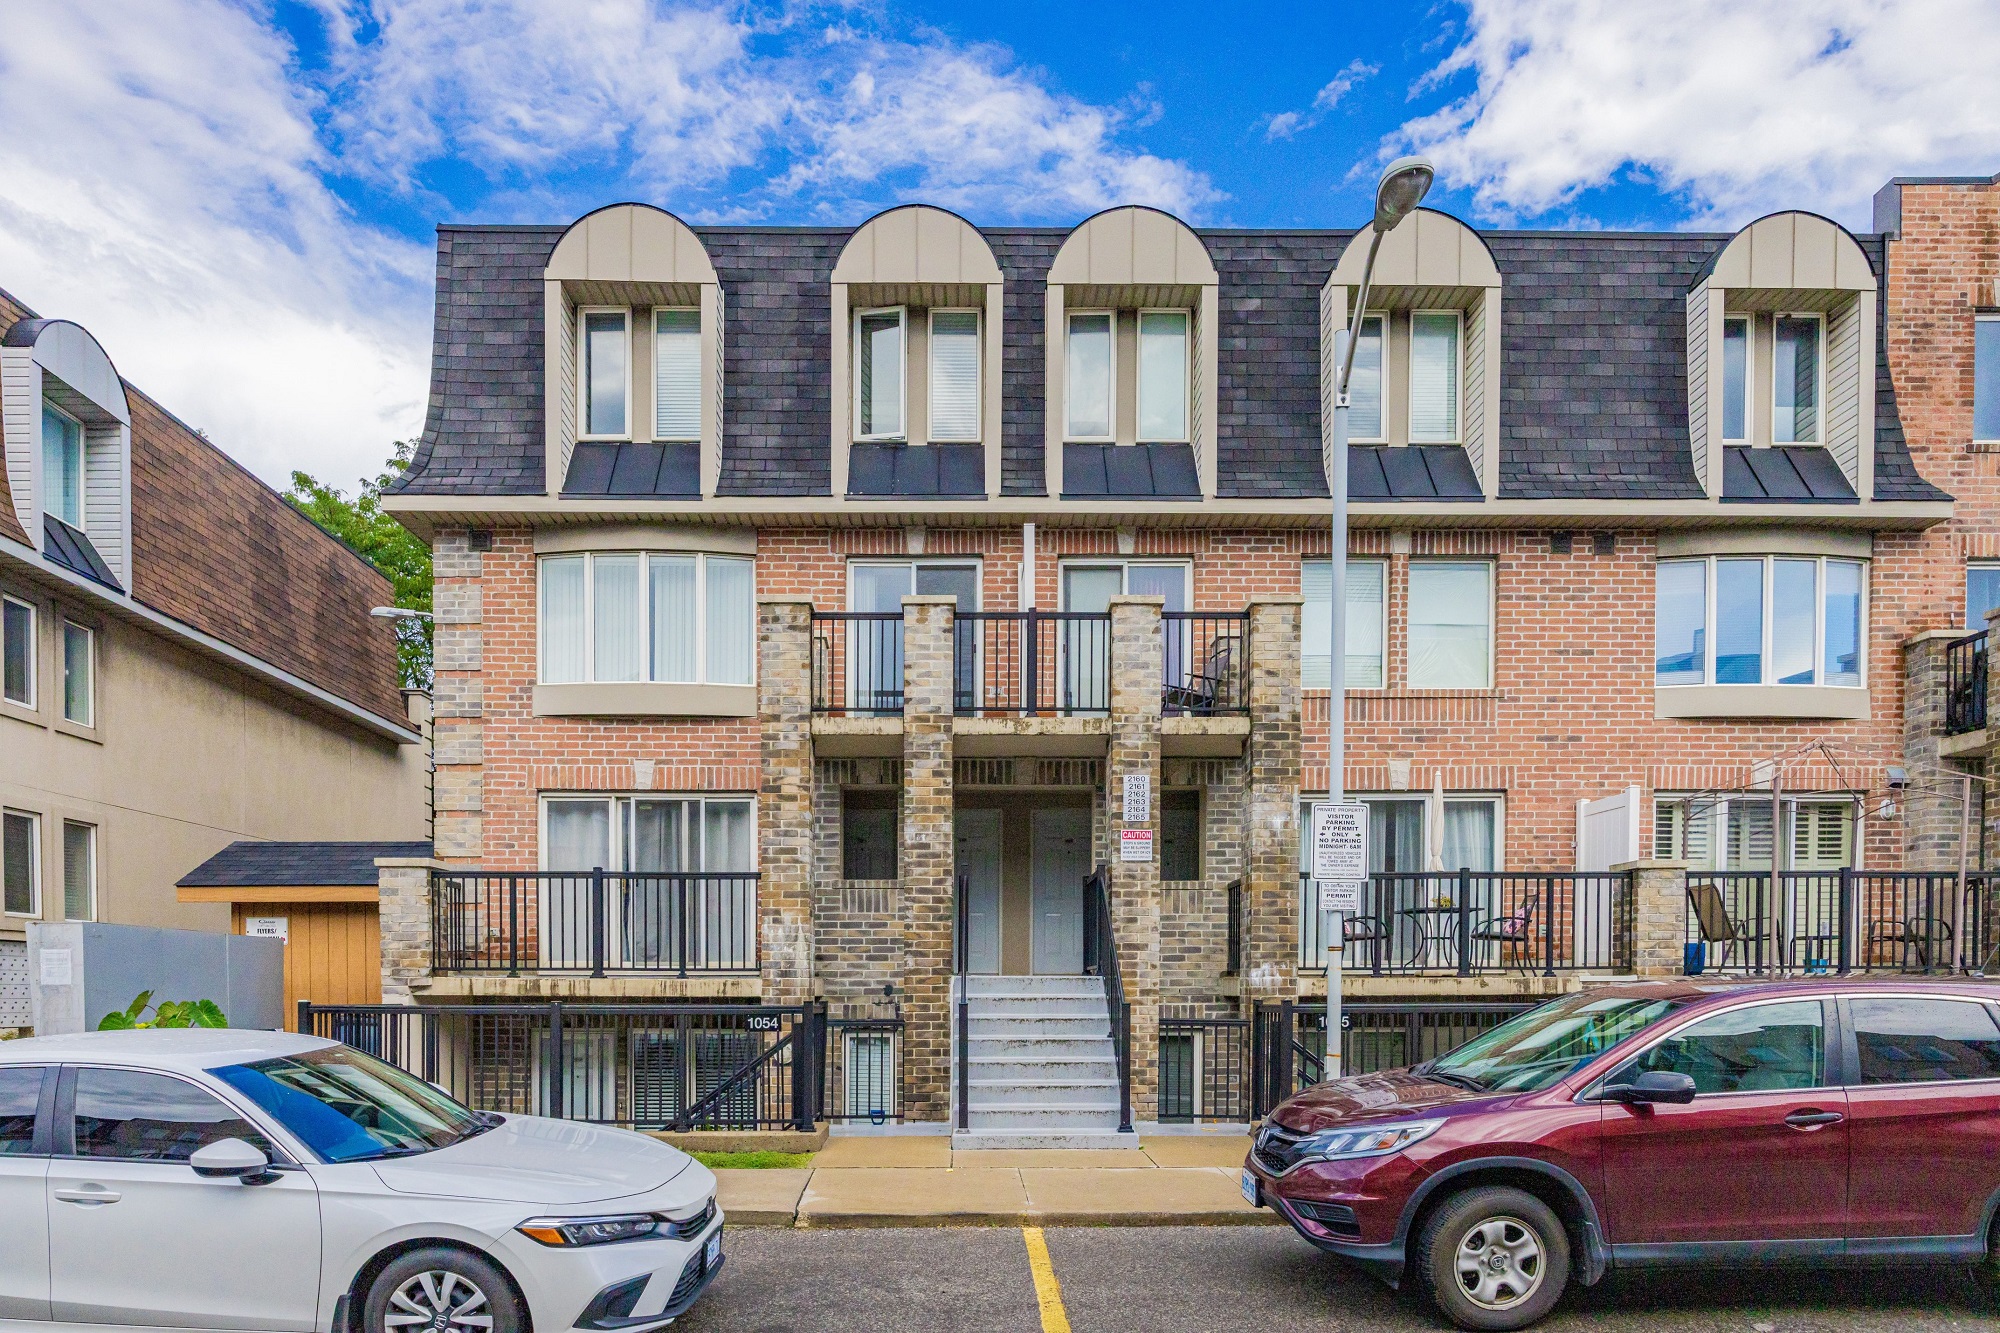 95 George Appleton Way, 2-storey stacked townhouse with red-brick exterior.